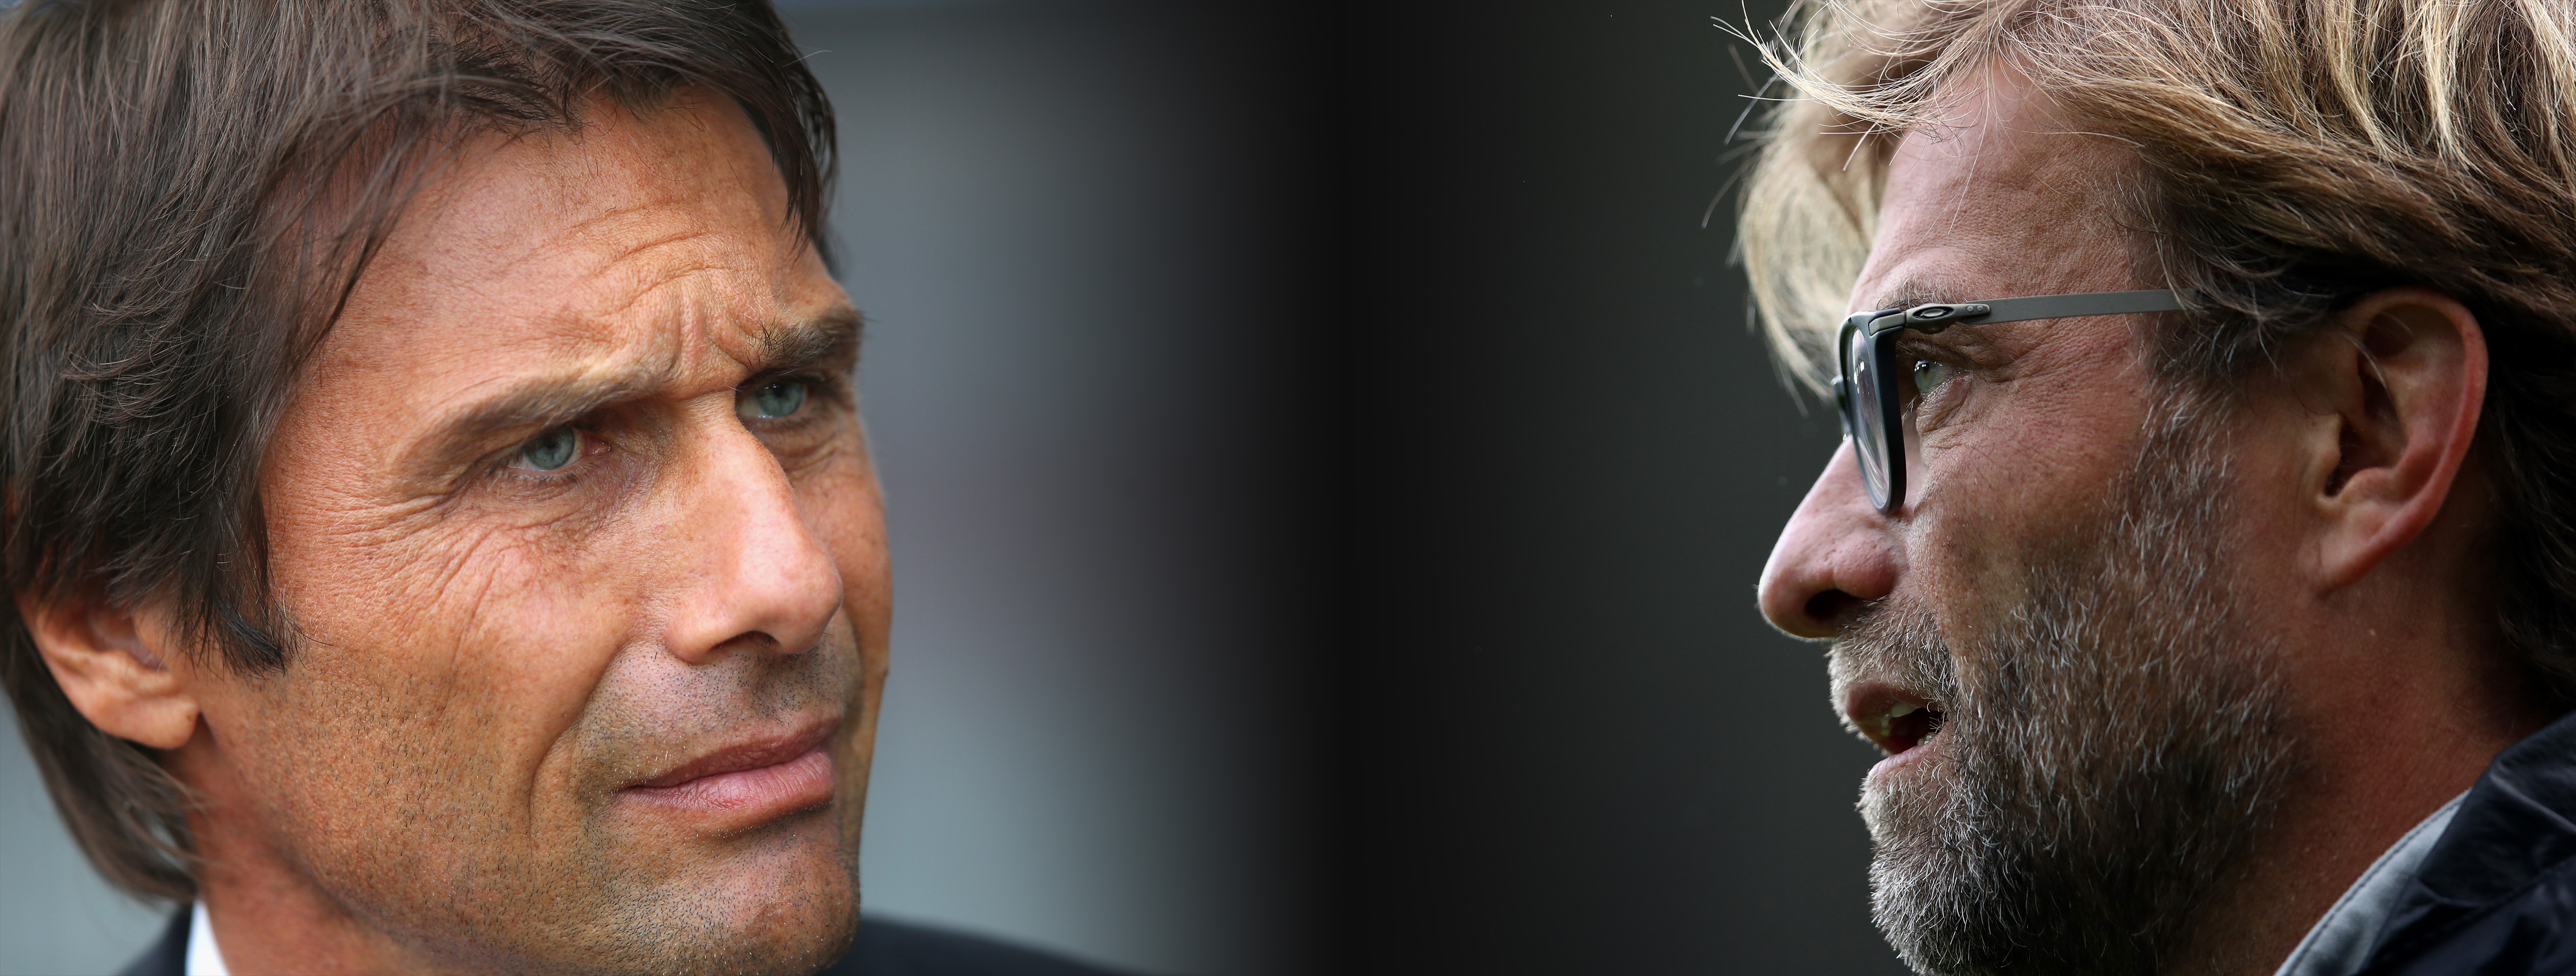 In this composite image a comparison has been made between Antonio Conte, manager of Spurs. and Jürgen Klopp. The men face each other with only their heads visible.